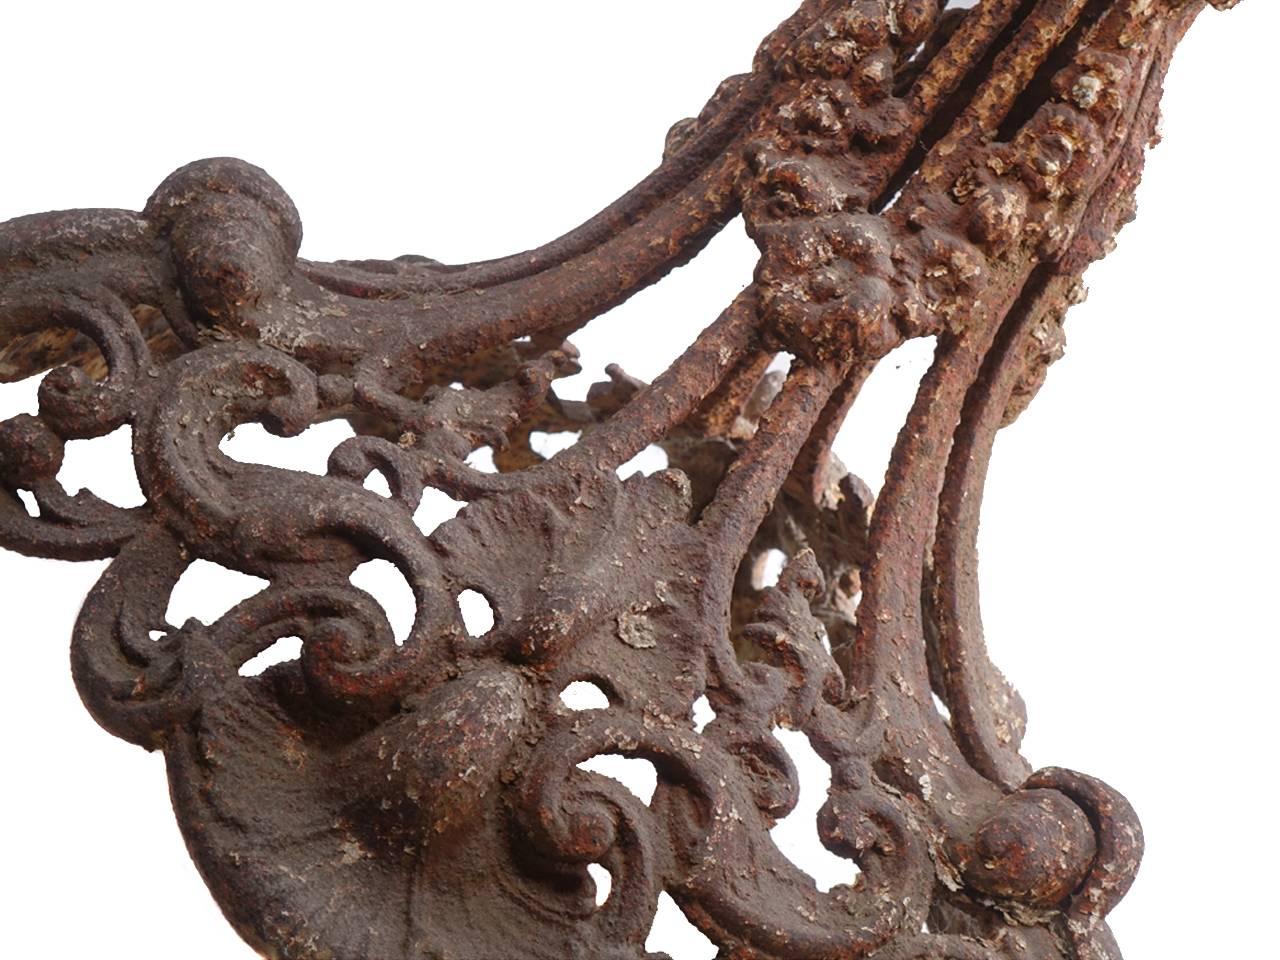 This cast iron base has just the right distressed look. There are small hints of black, and white paint in all the crevices contrasted against an orange rust background. The cast iron is typical Frisk showing all the Victorian ornate detail they